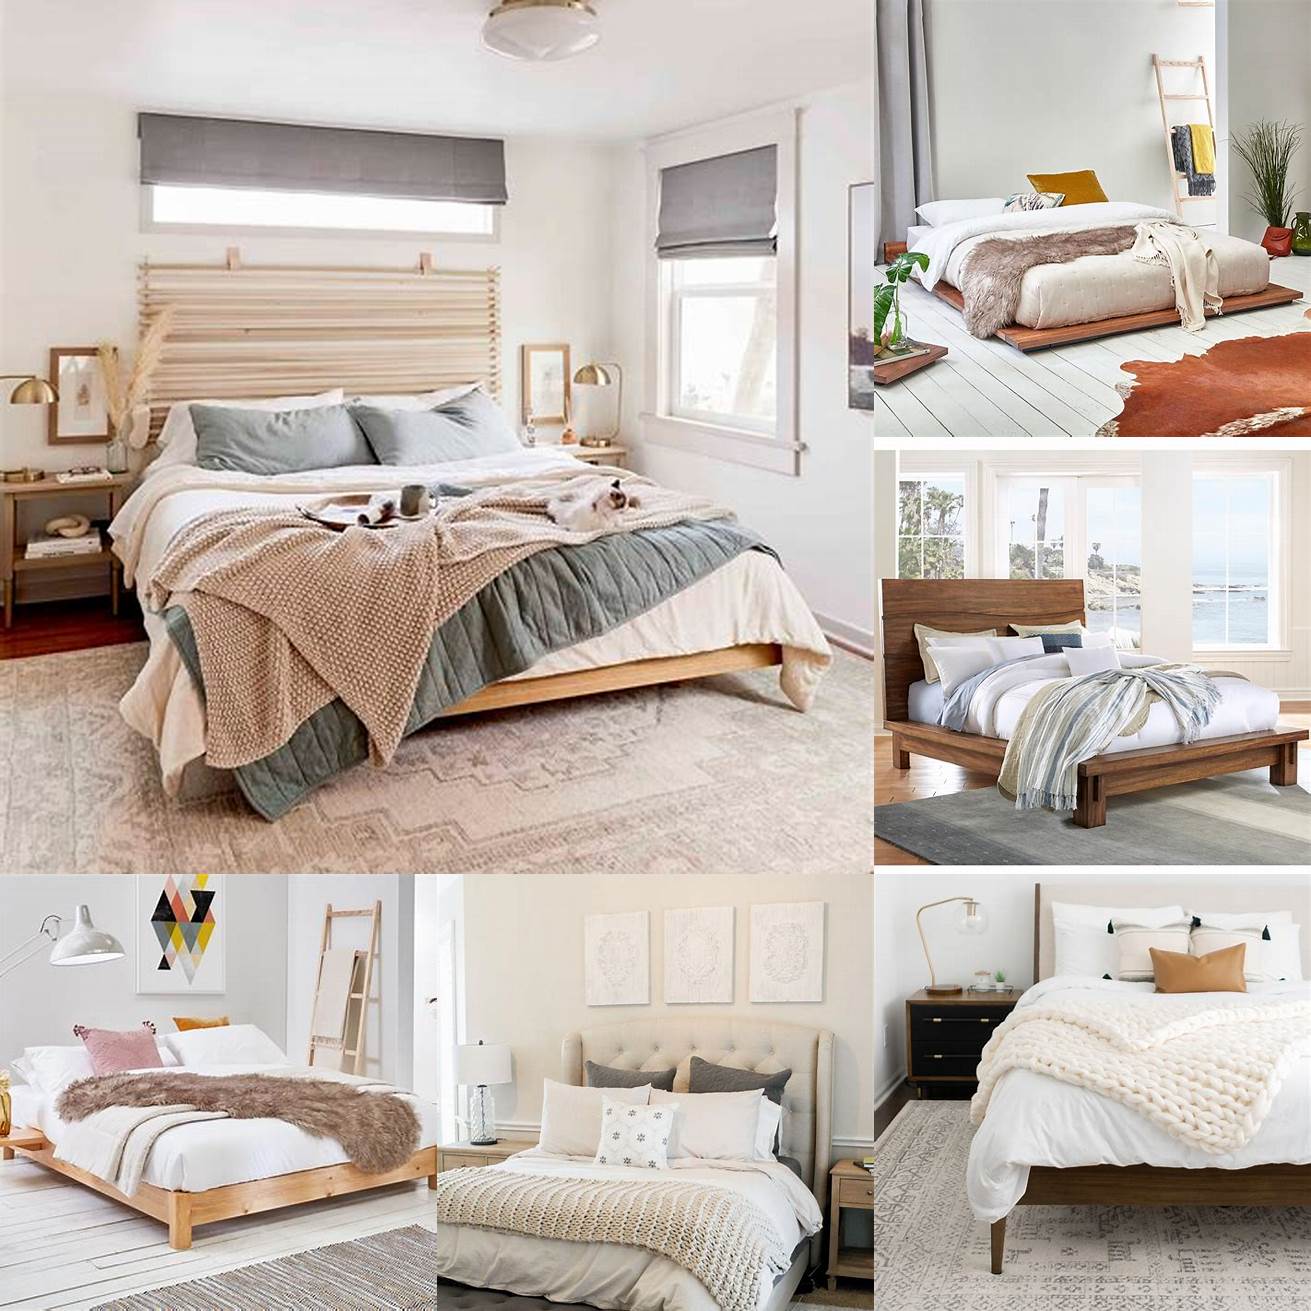 A wooden low profile bed with neutral bedding and fun textured accessories